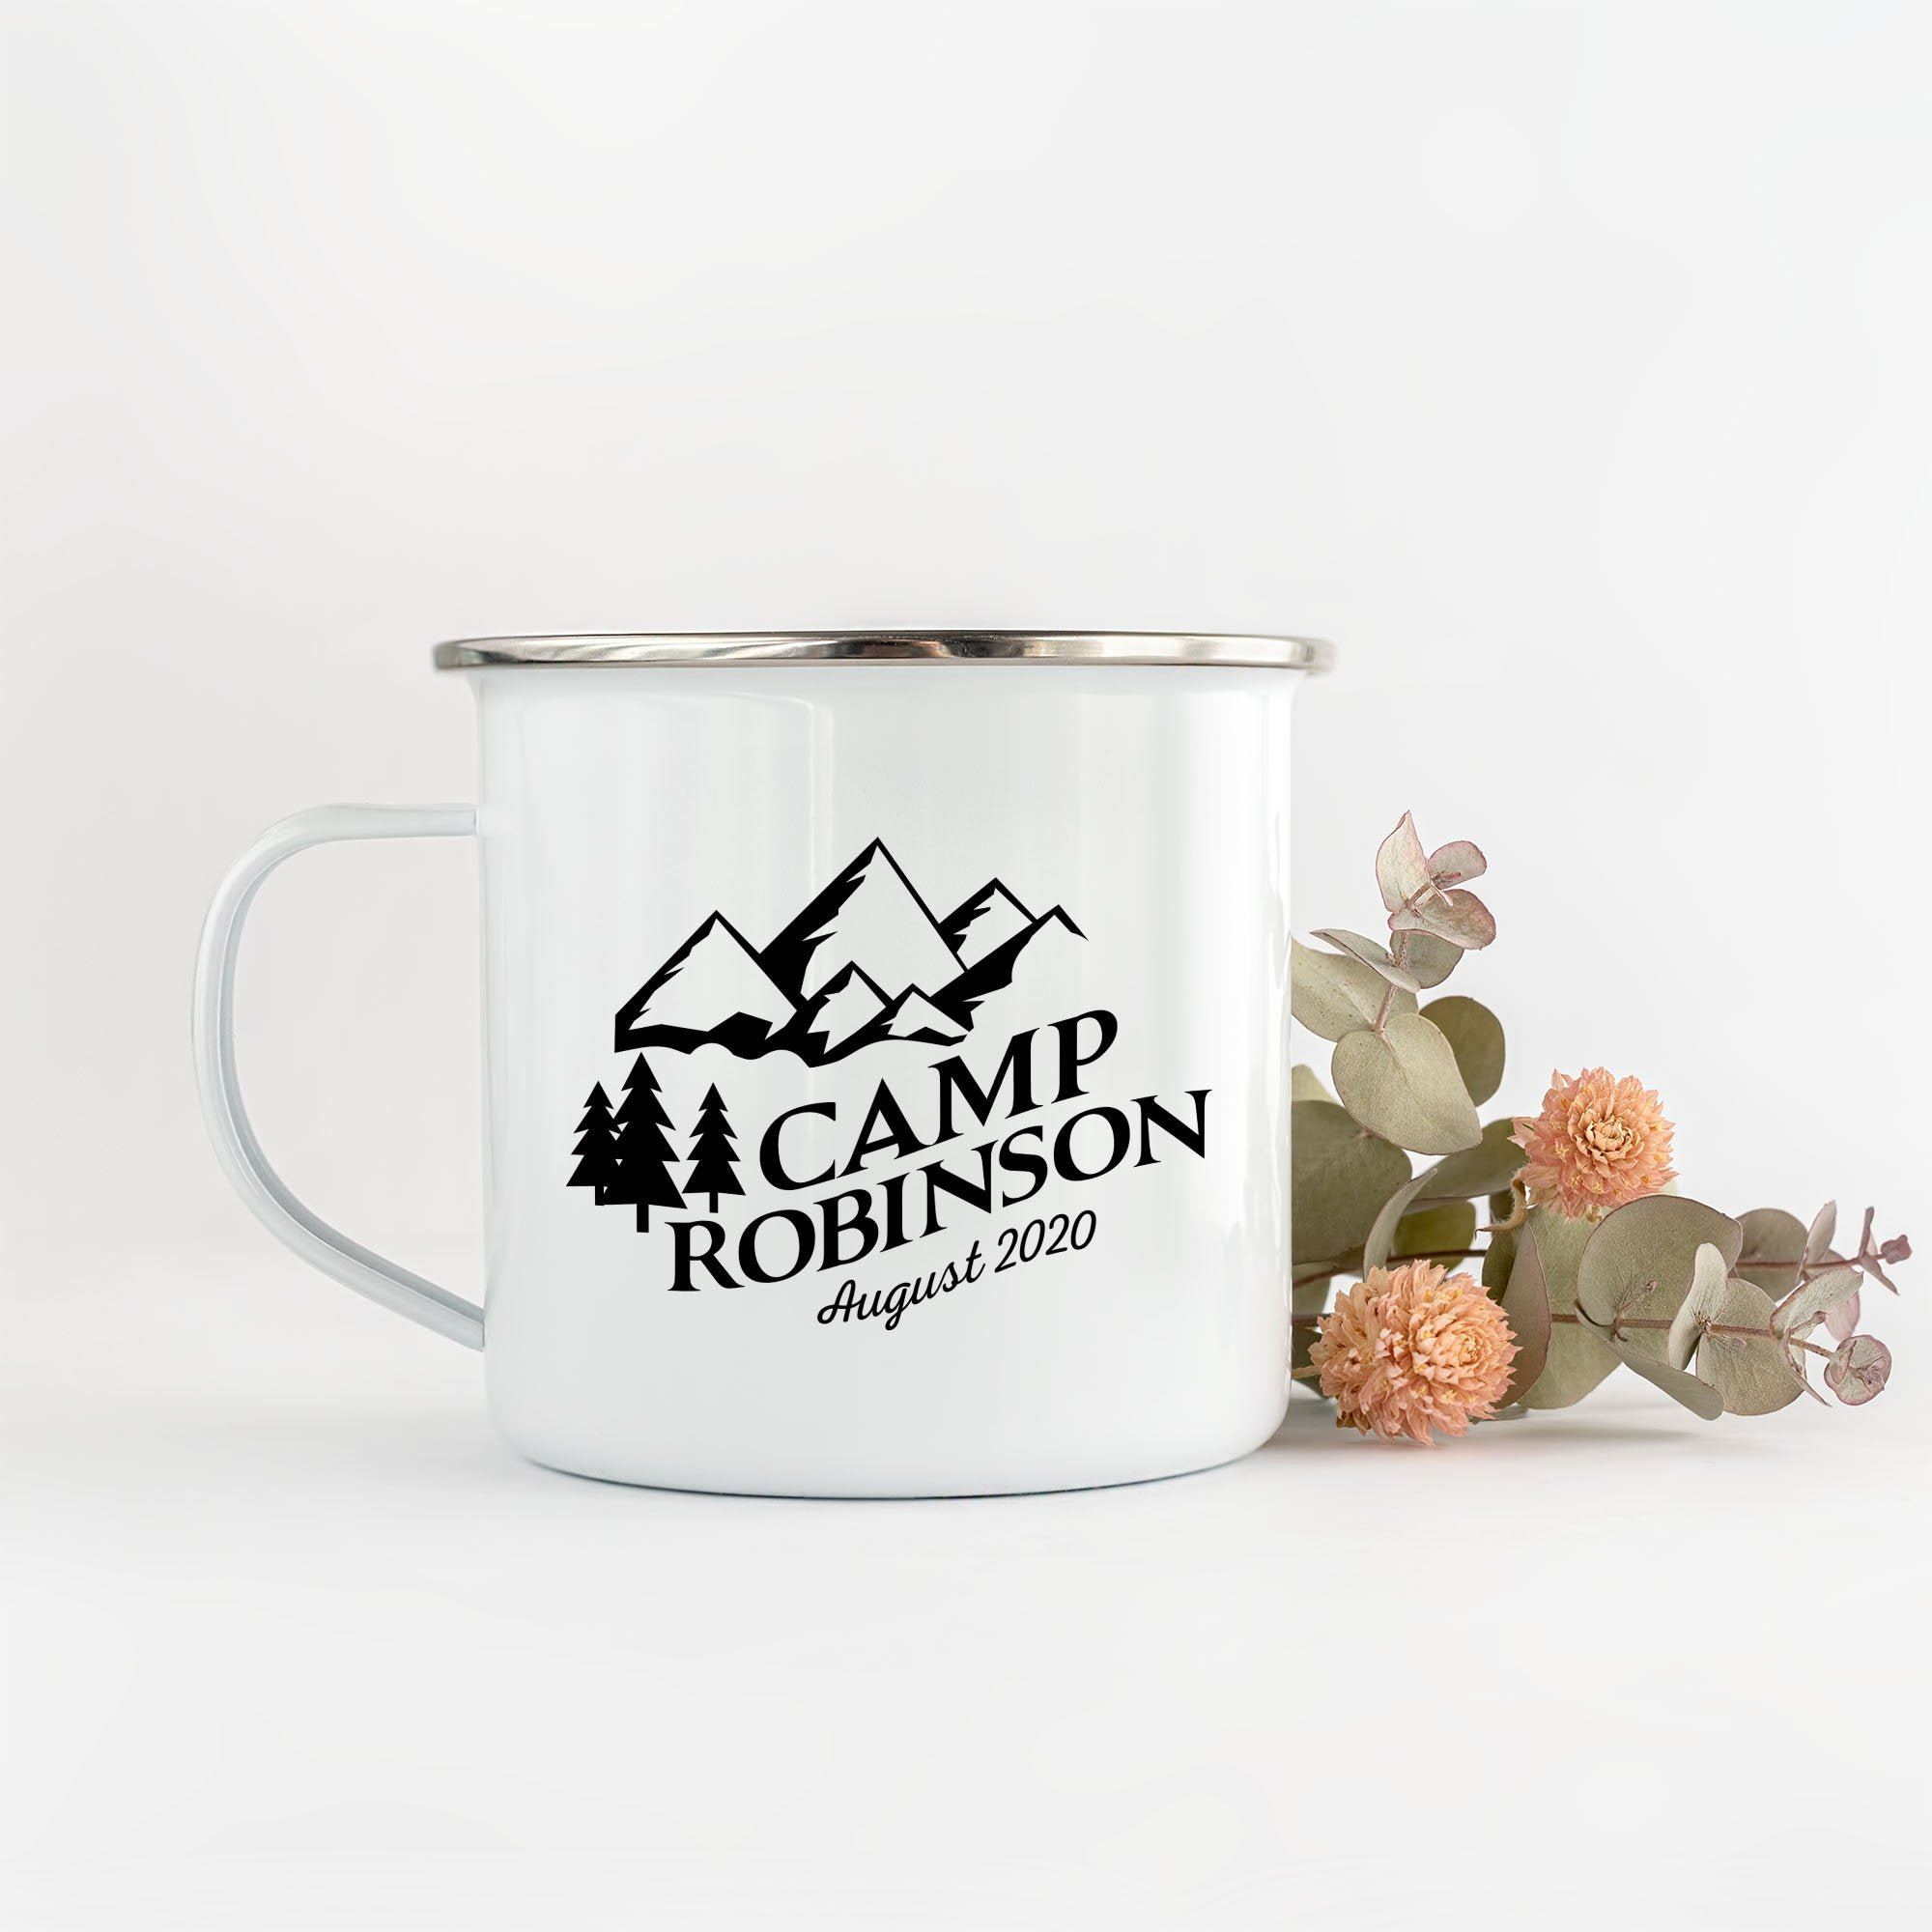 Personalised enamel camper mug with name and camp date, Outdoor, Trailer Gift